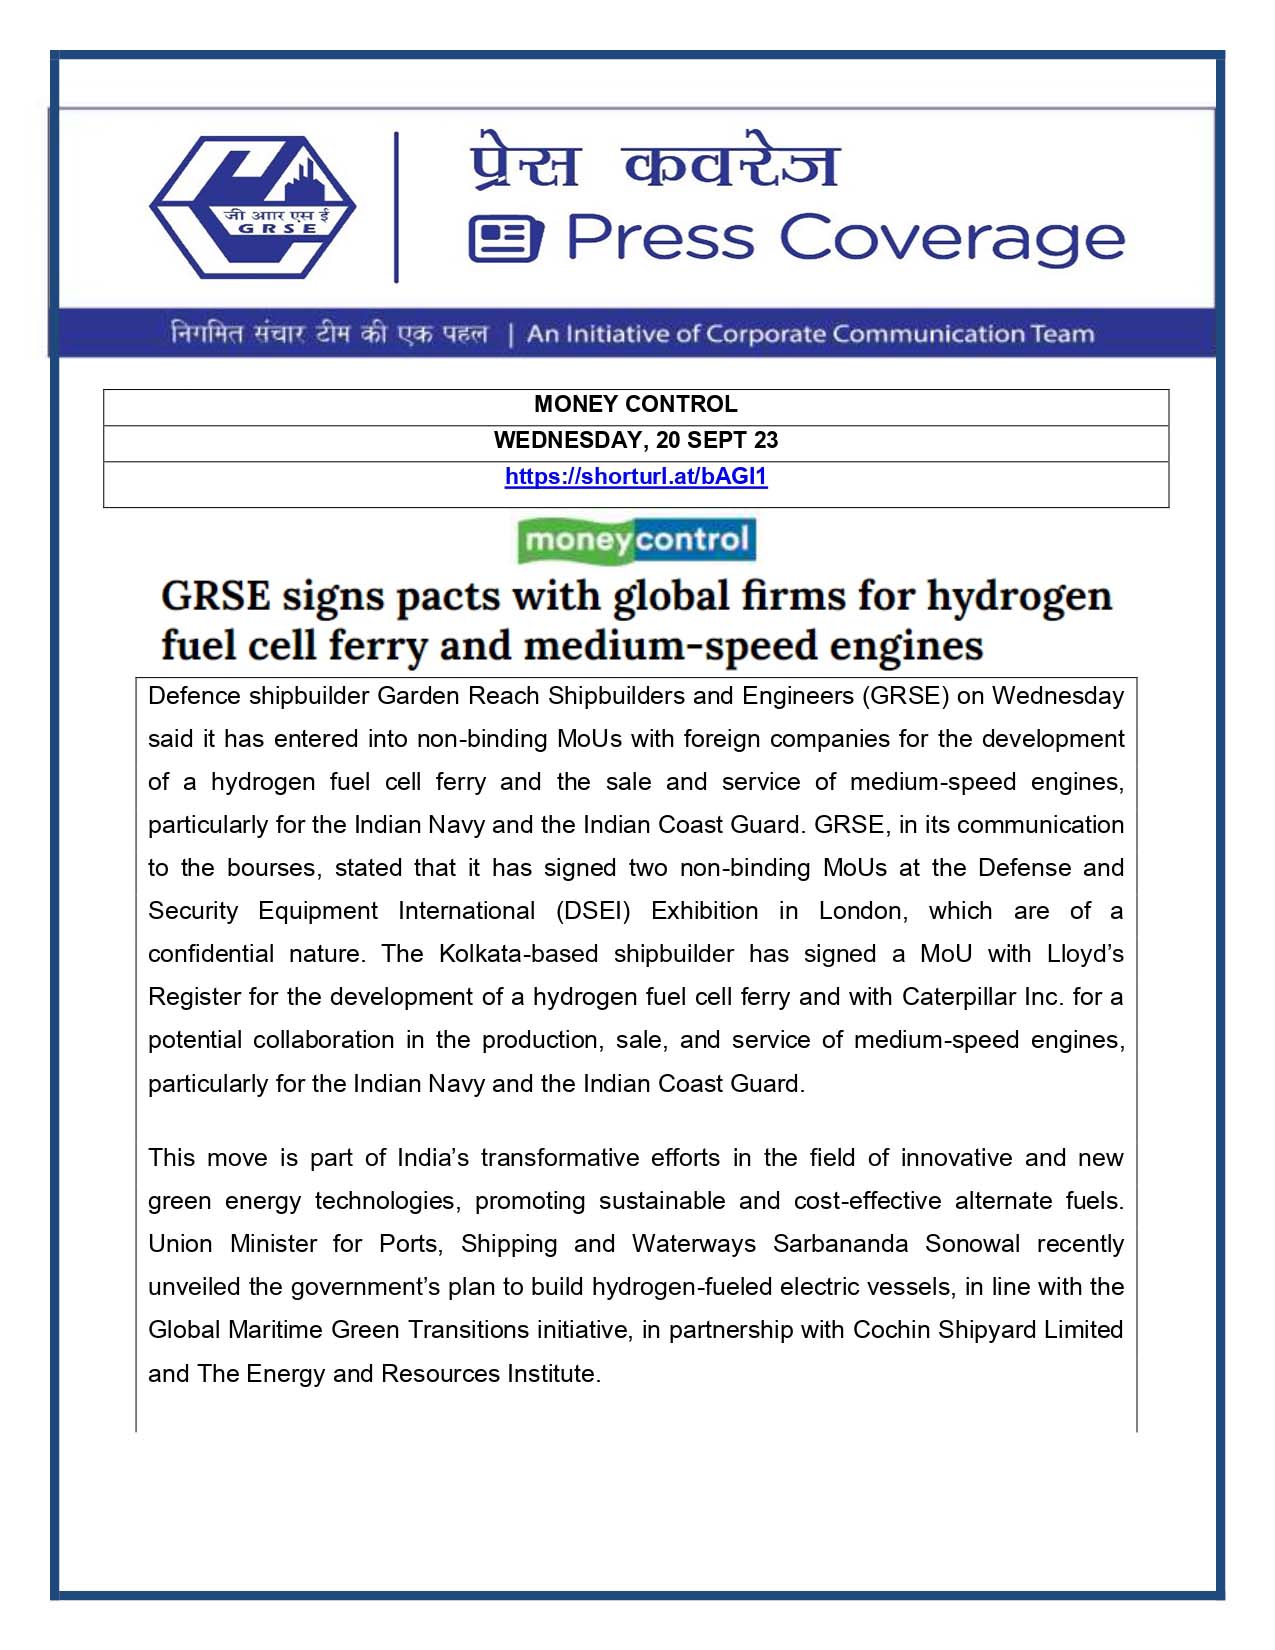 Press Coverage : Money Control, 20 Sep 23 : GRSE signs pact with Global firms for Hydrogen Fuel Cell Ferry and Medium-Speed Engines